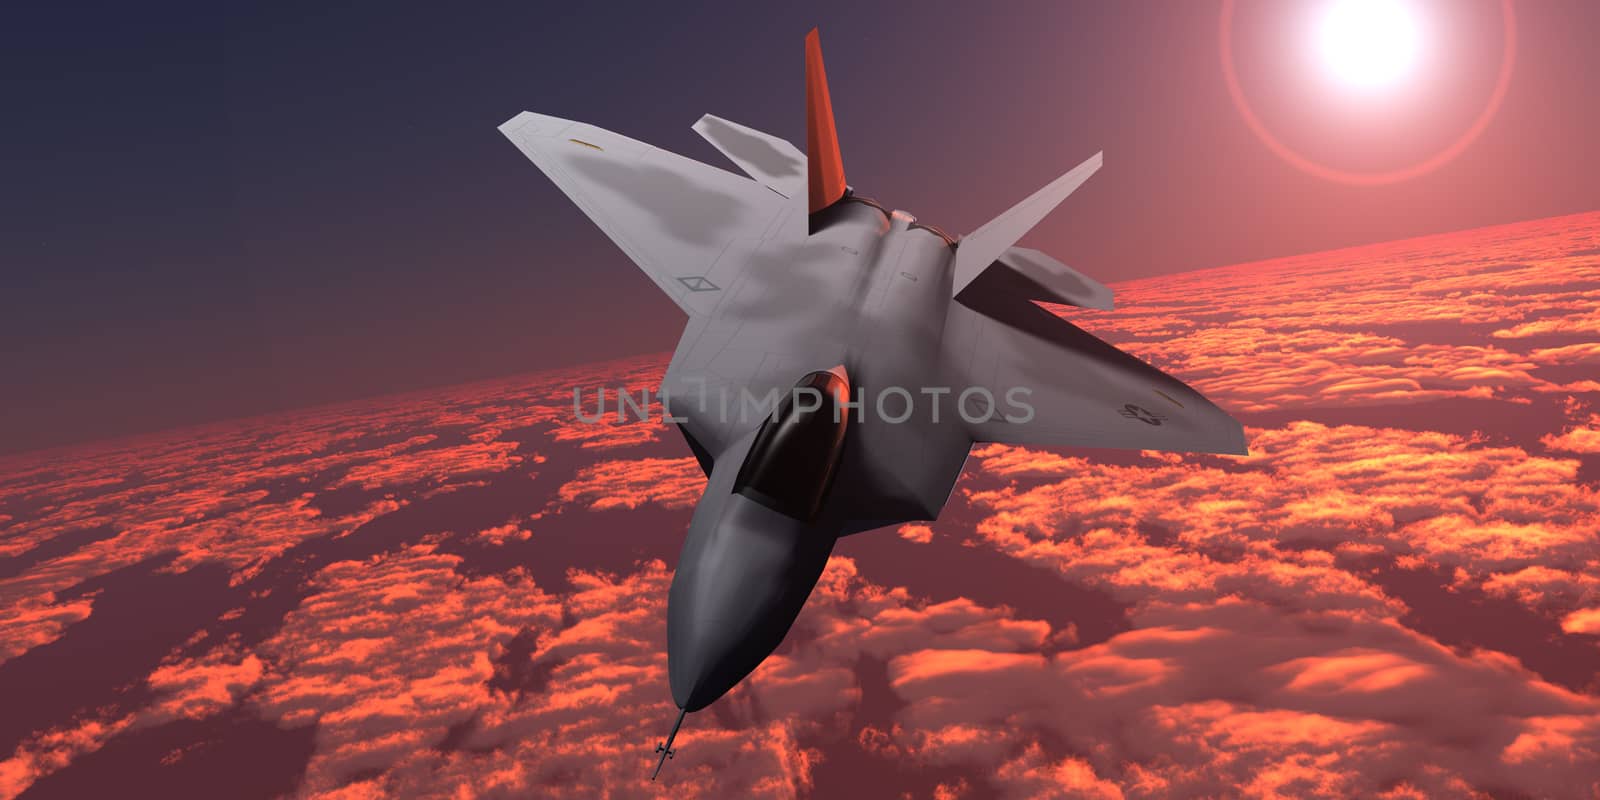 An F-22 fighter jet flies at an altitude above the cloud layer on its mission.